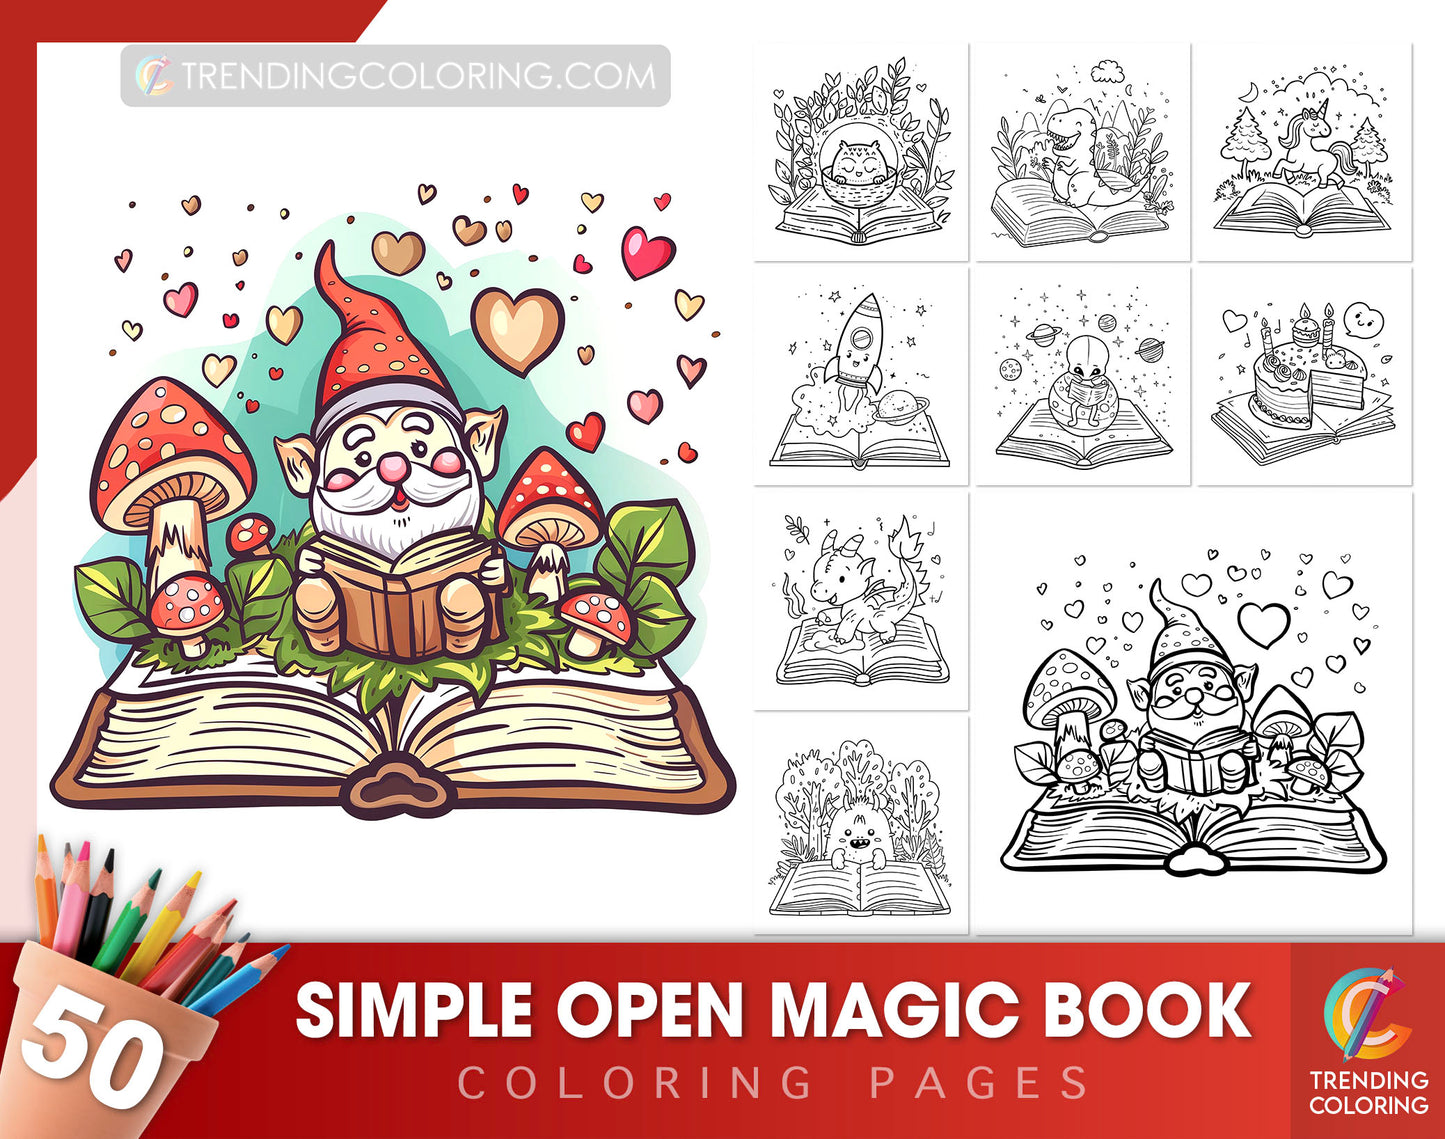 50 Simple Open Magic Book Coloring Pages - Instant Download - Printable PDF